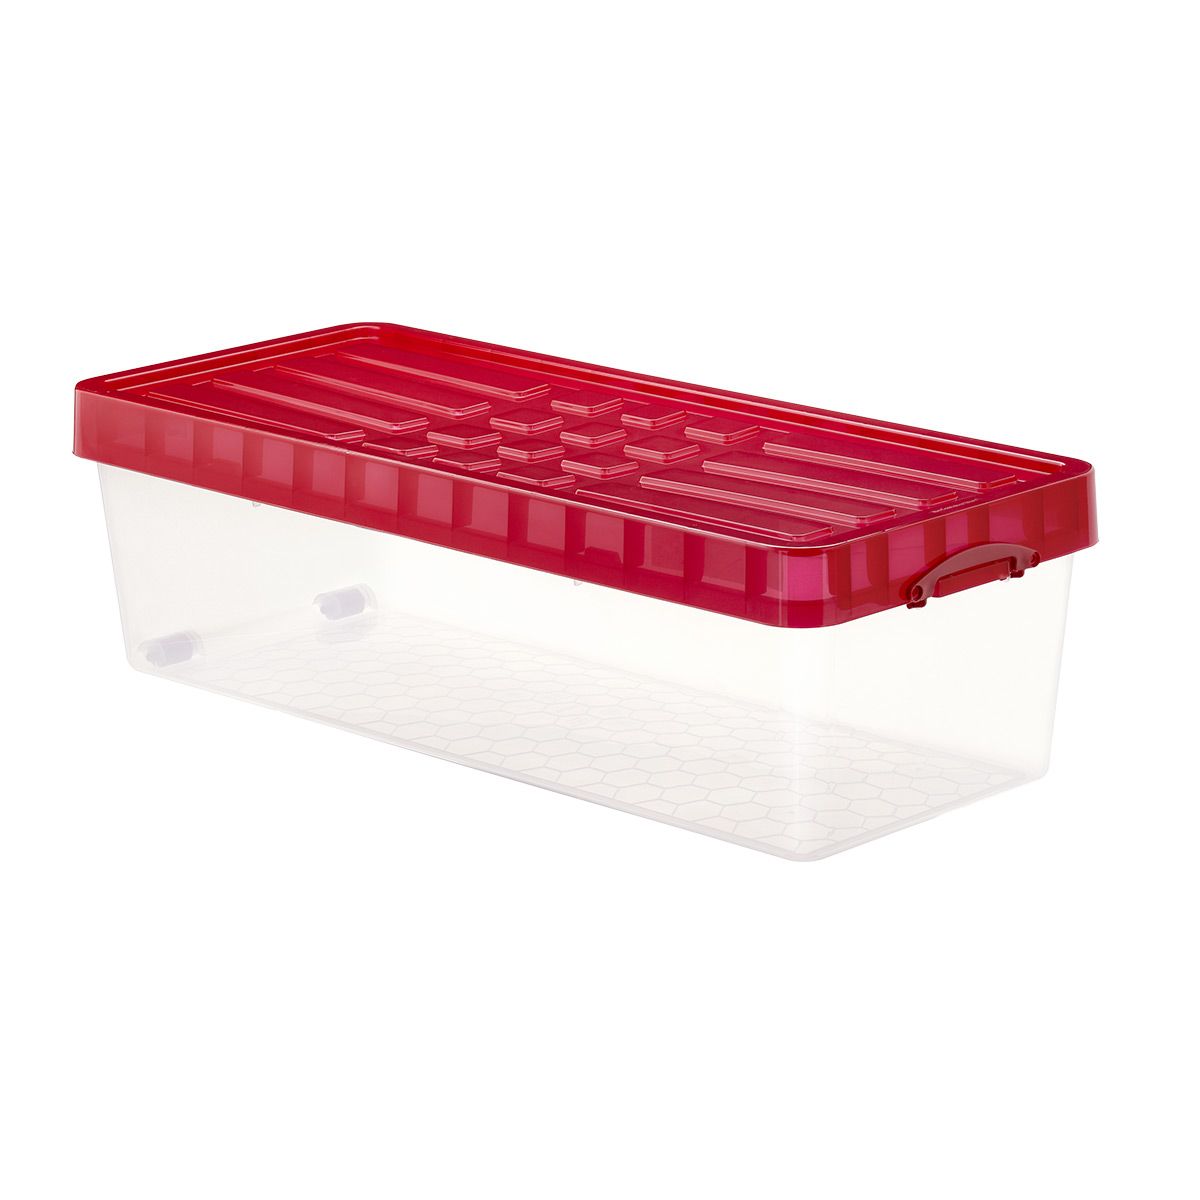 Premier Clear Modular Totes with Red Lid | The Container Store